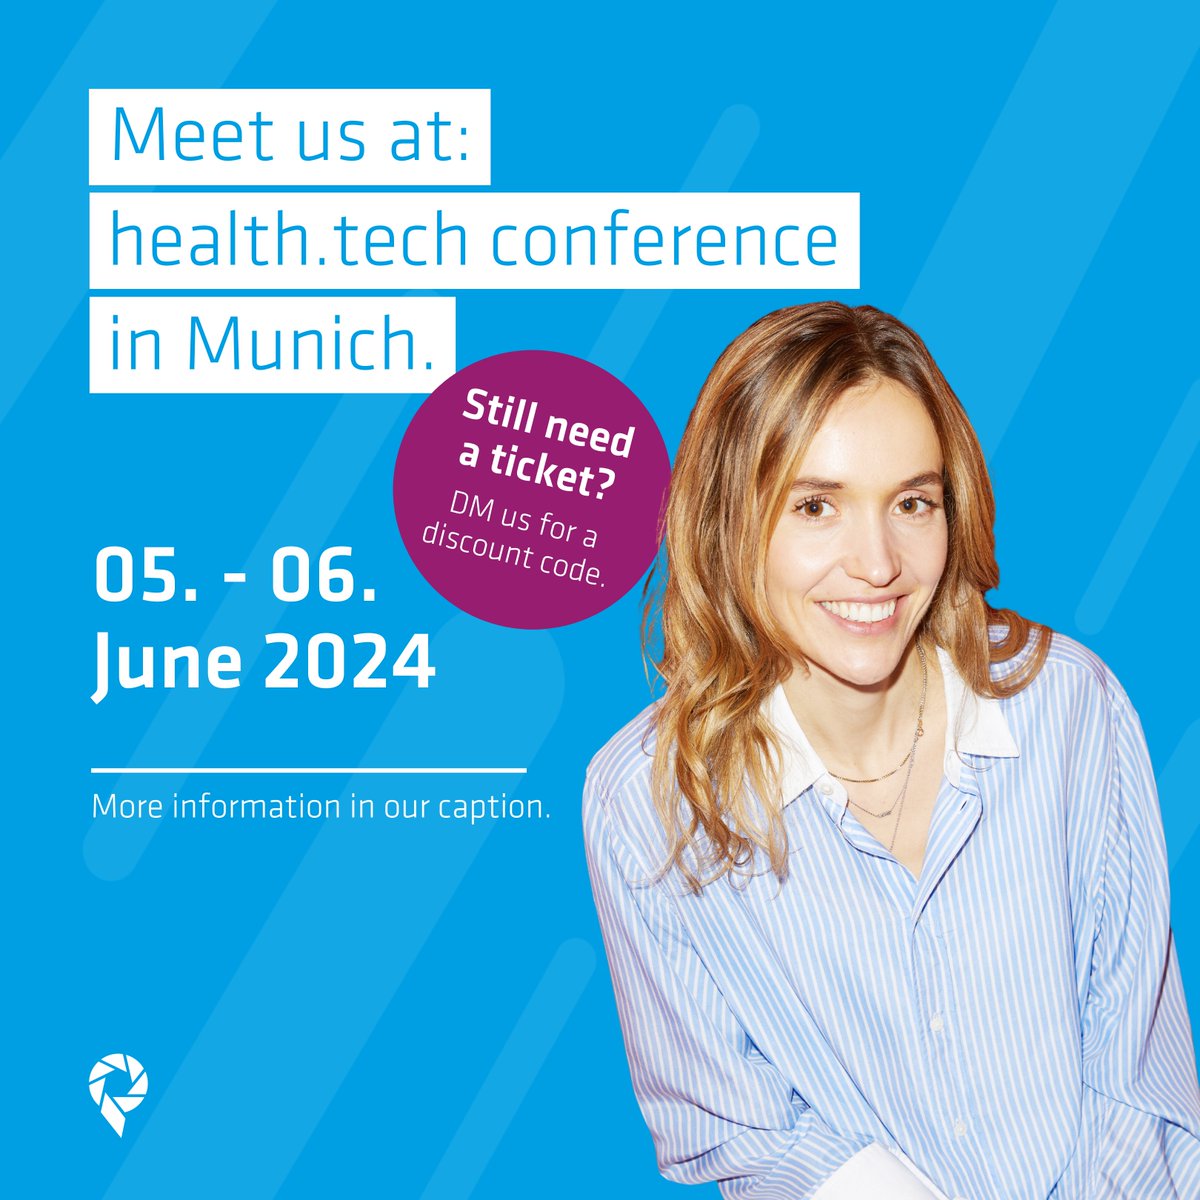 Excited to announce Anna Damerow and Kaori Yamaguchi-Humpert will be at @bitsHealthTech by @bitsandpretzels in Munich!🤝 Join 2,500+ attendees & hear from top speakers like Mario Schlosser & Hema Purohit. DM us to meet Anna or Kaori & get an exclusive 20% discount code! 🌐